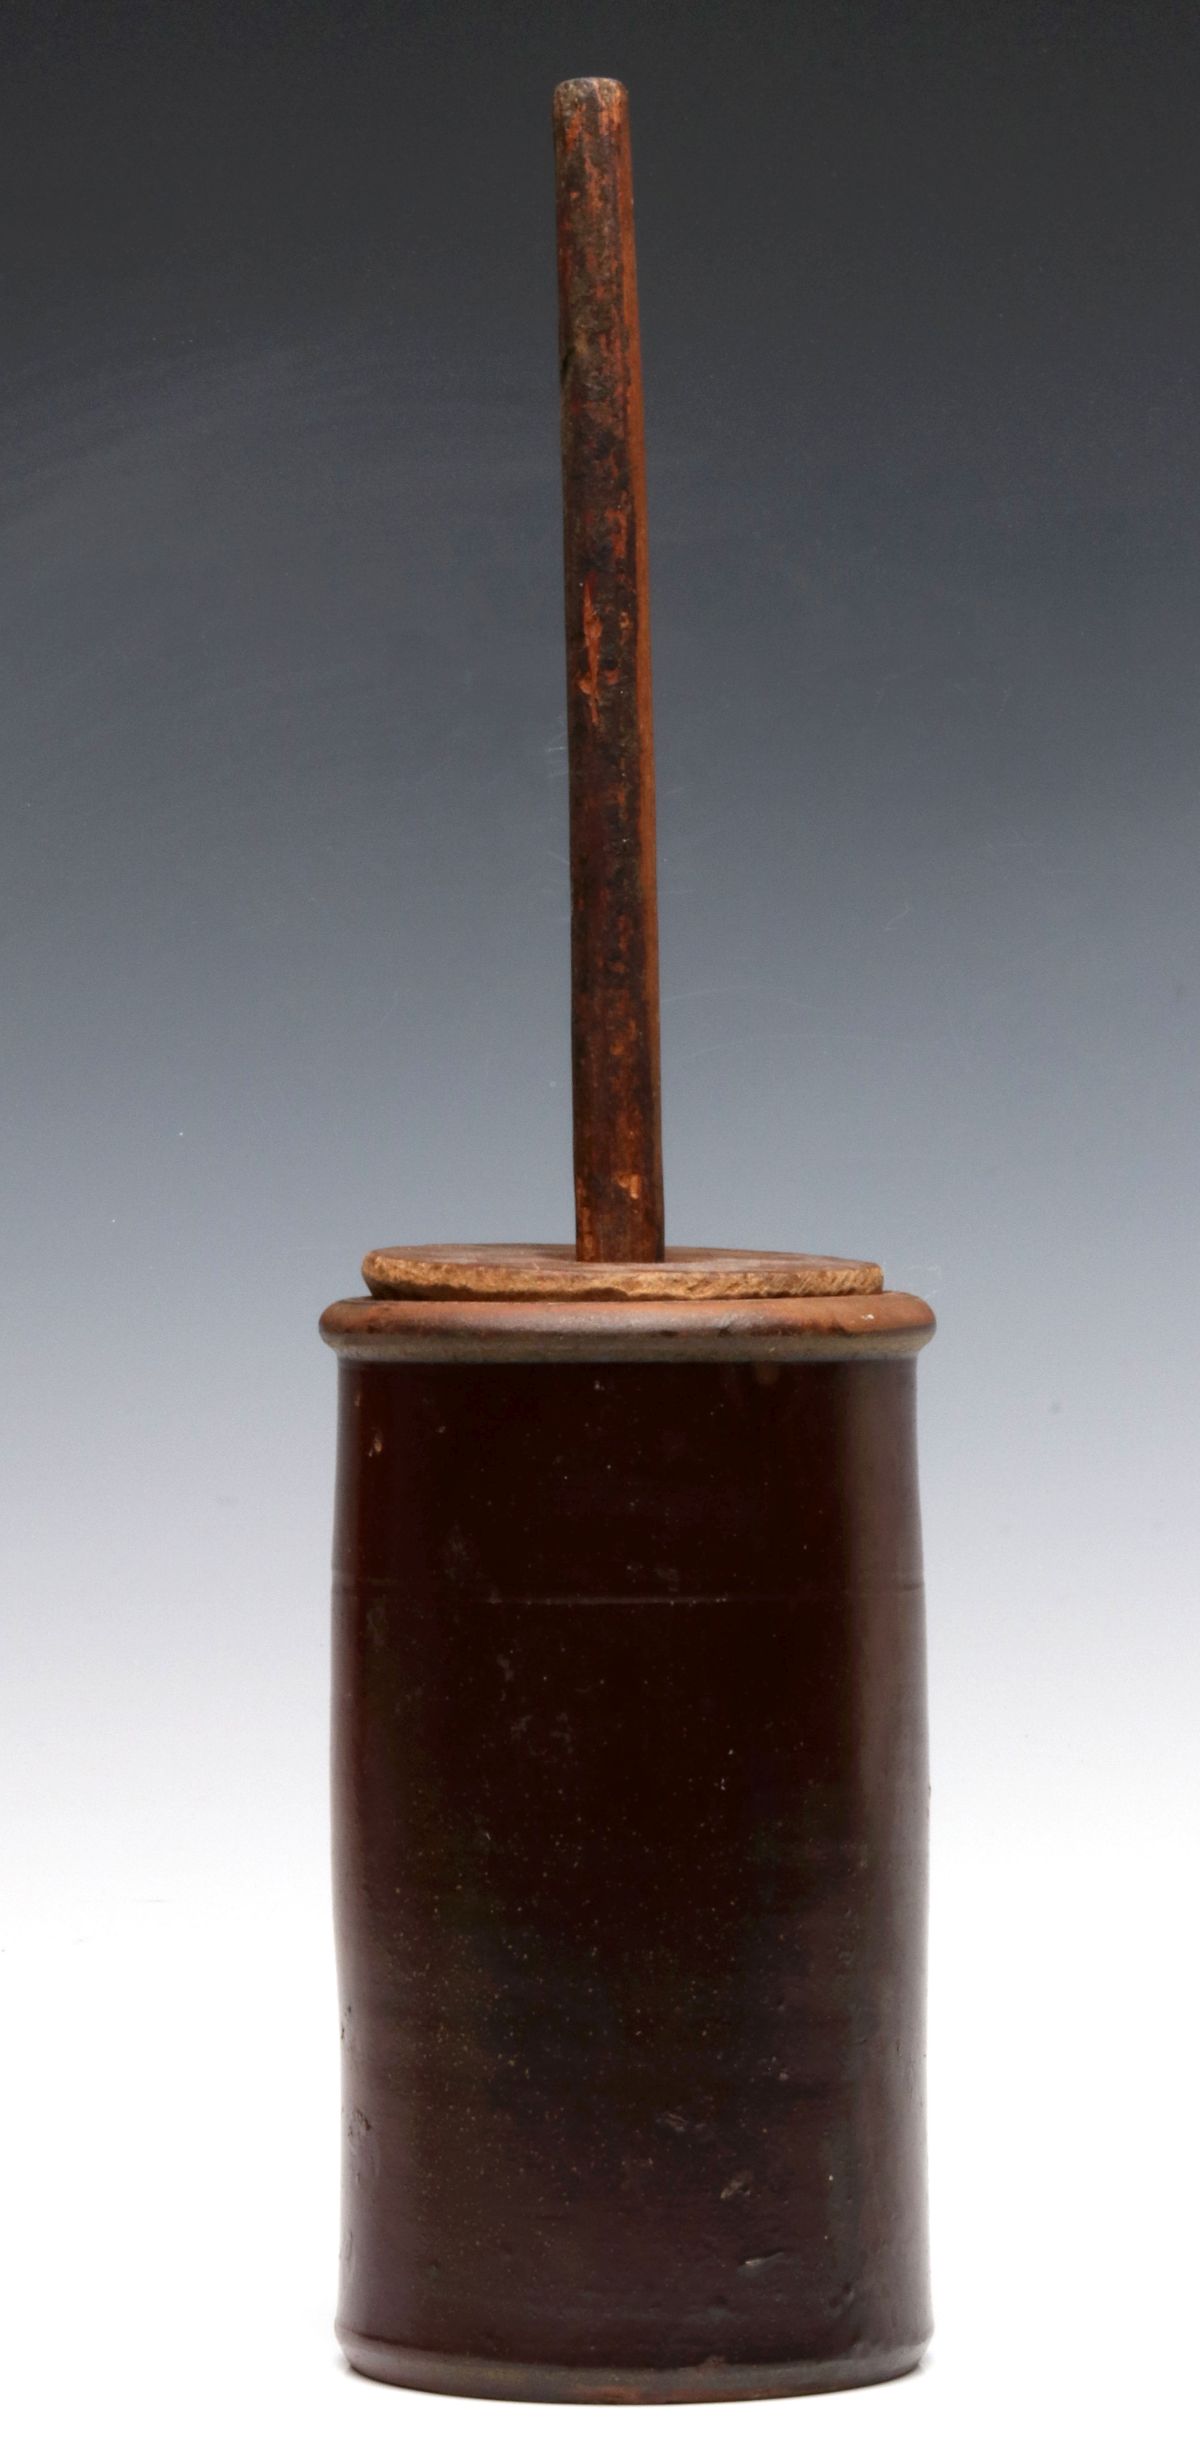 A 10-INCH 19TH CENTURY STONEWARE CHURN WITH DASHER